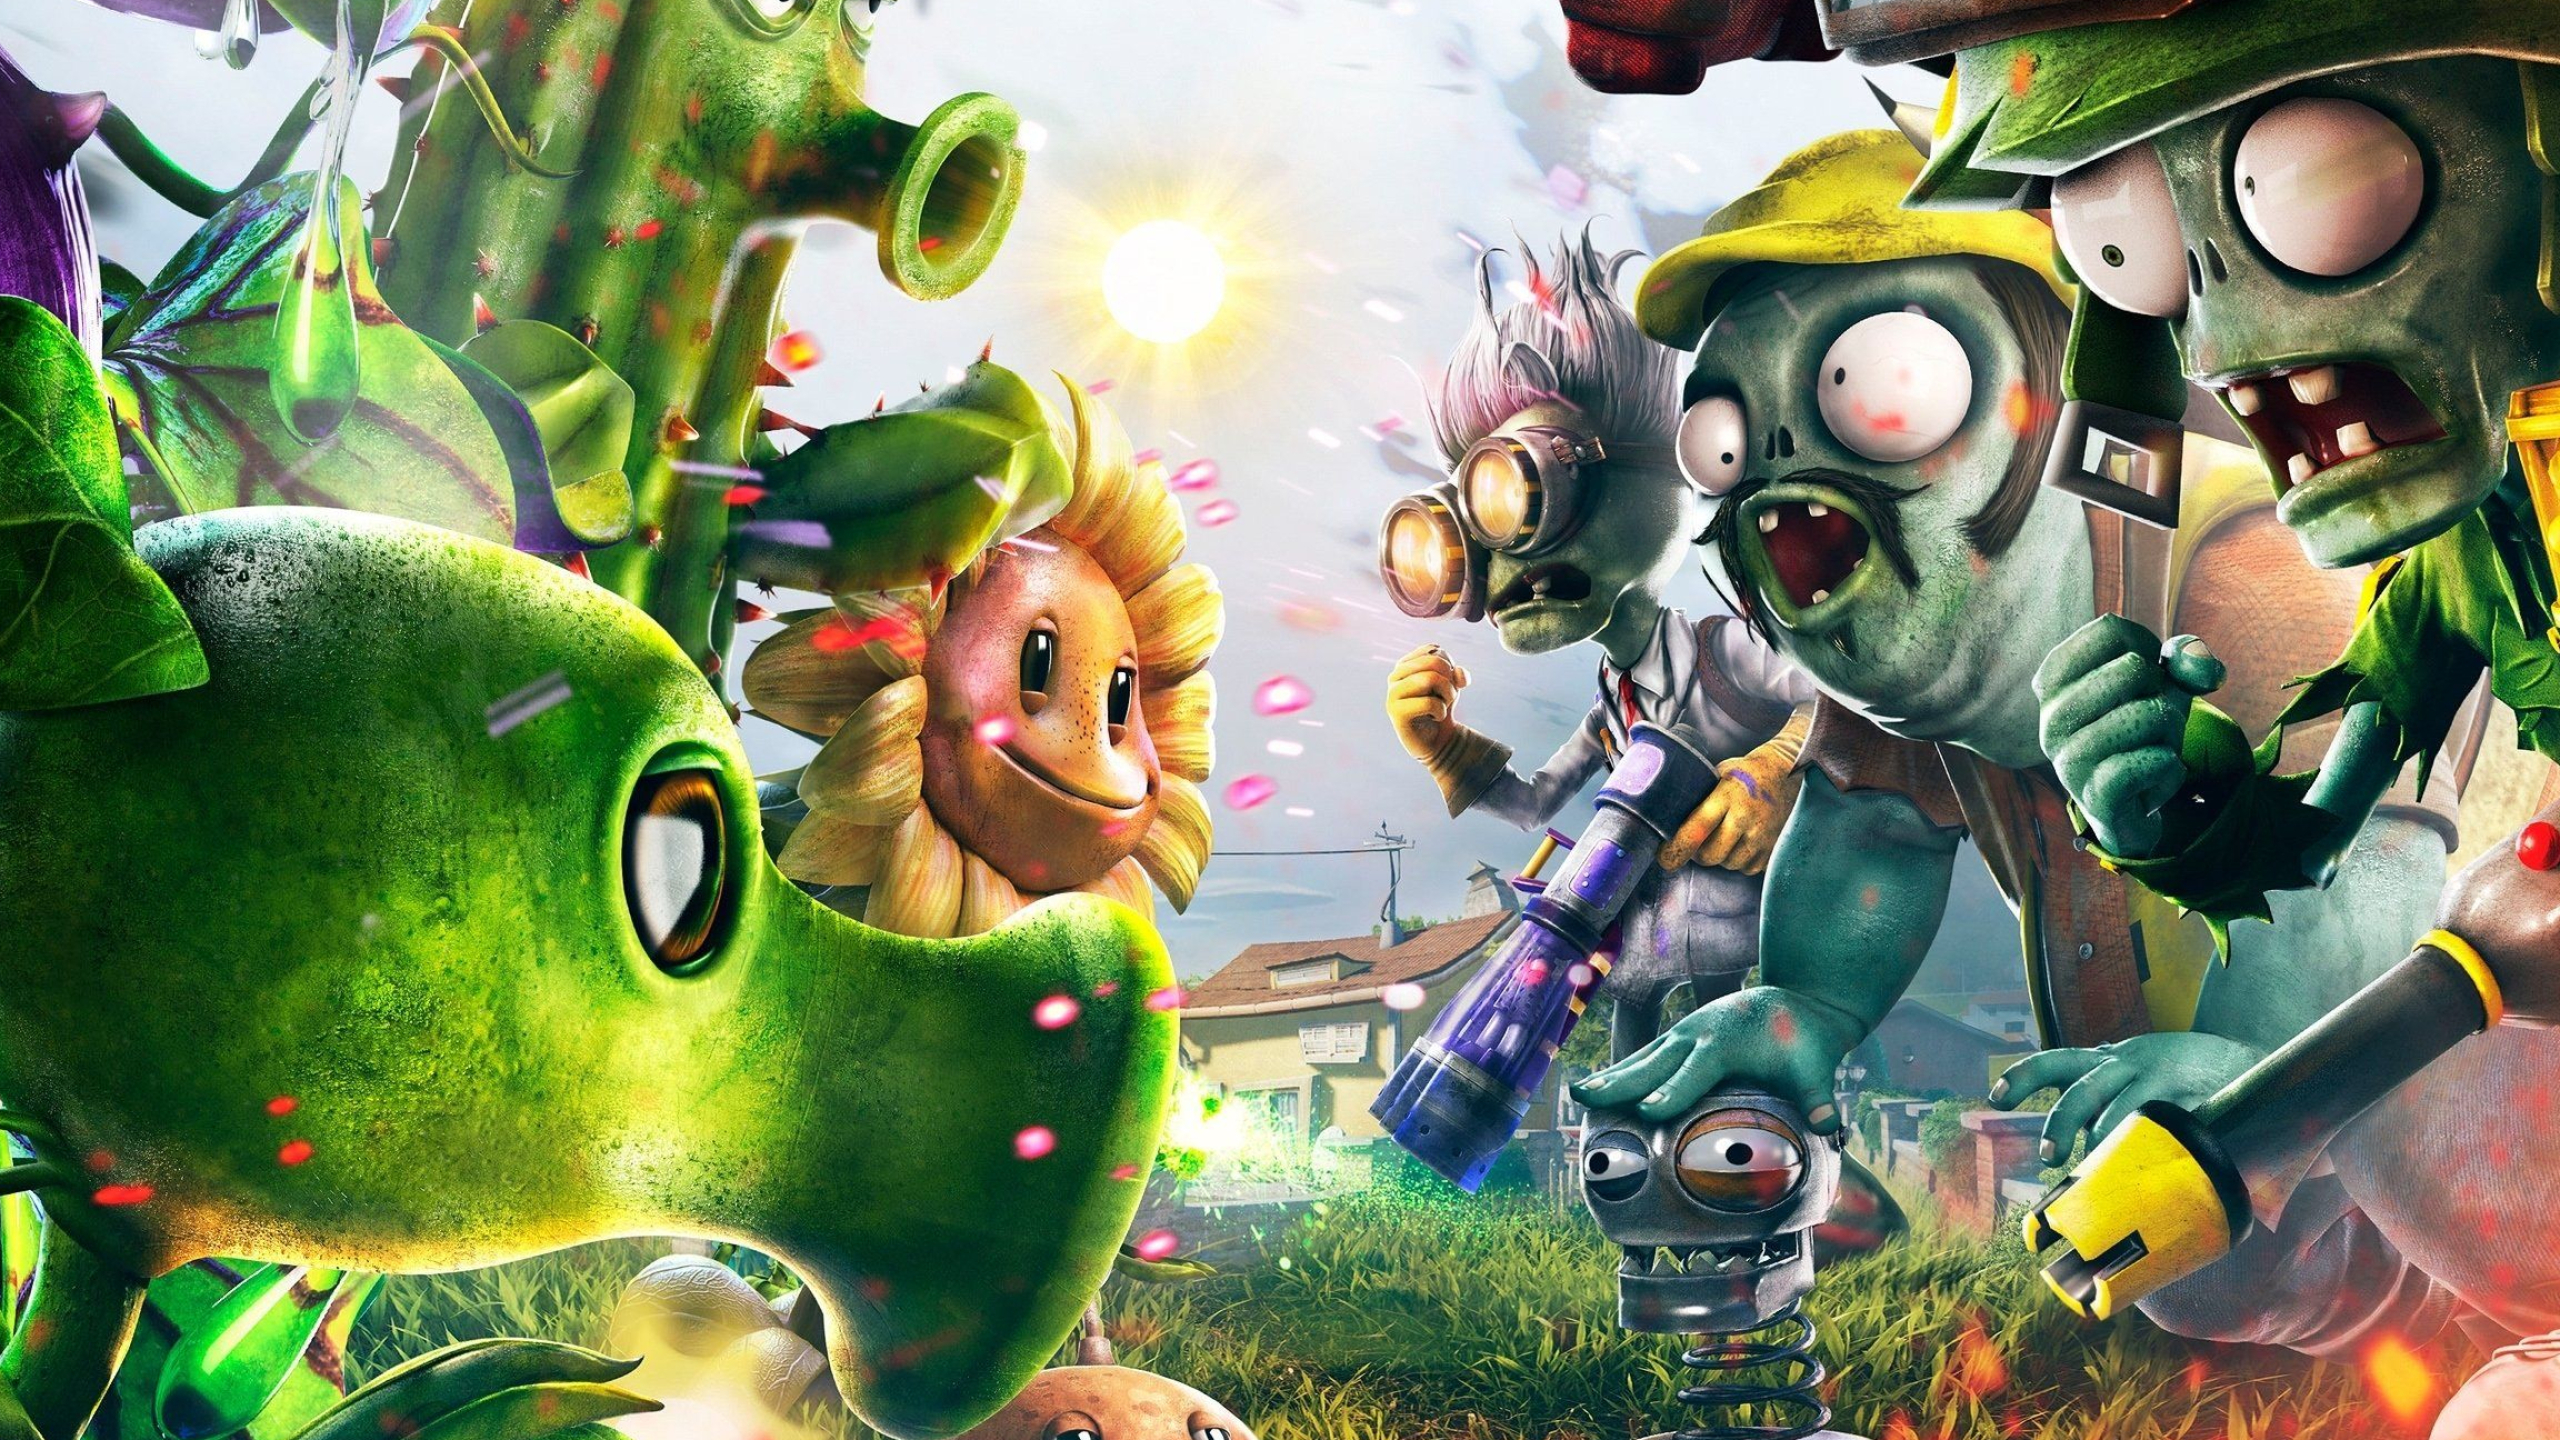 2560x1440 Plants Vs Zombies 2 Wallpapers Top Free Plants Vs Zombies 2 Backgrounds